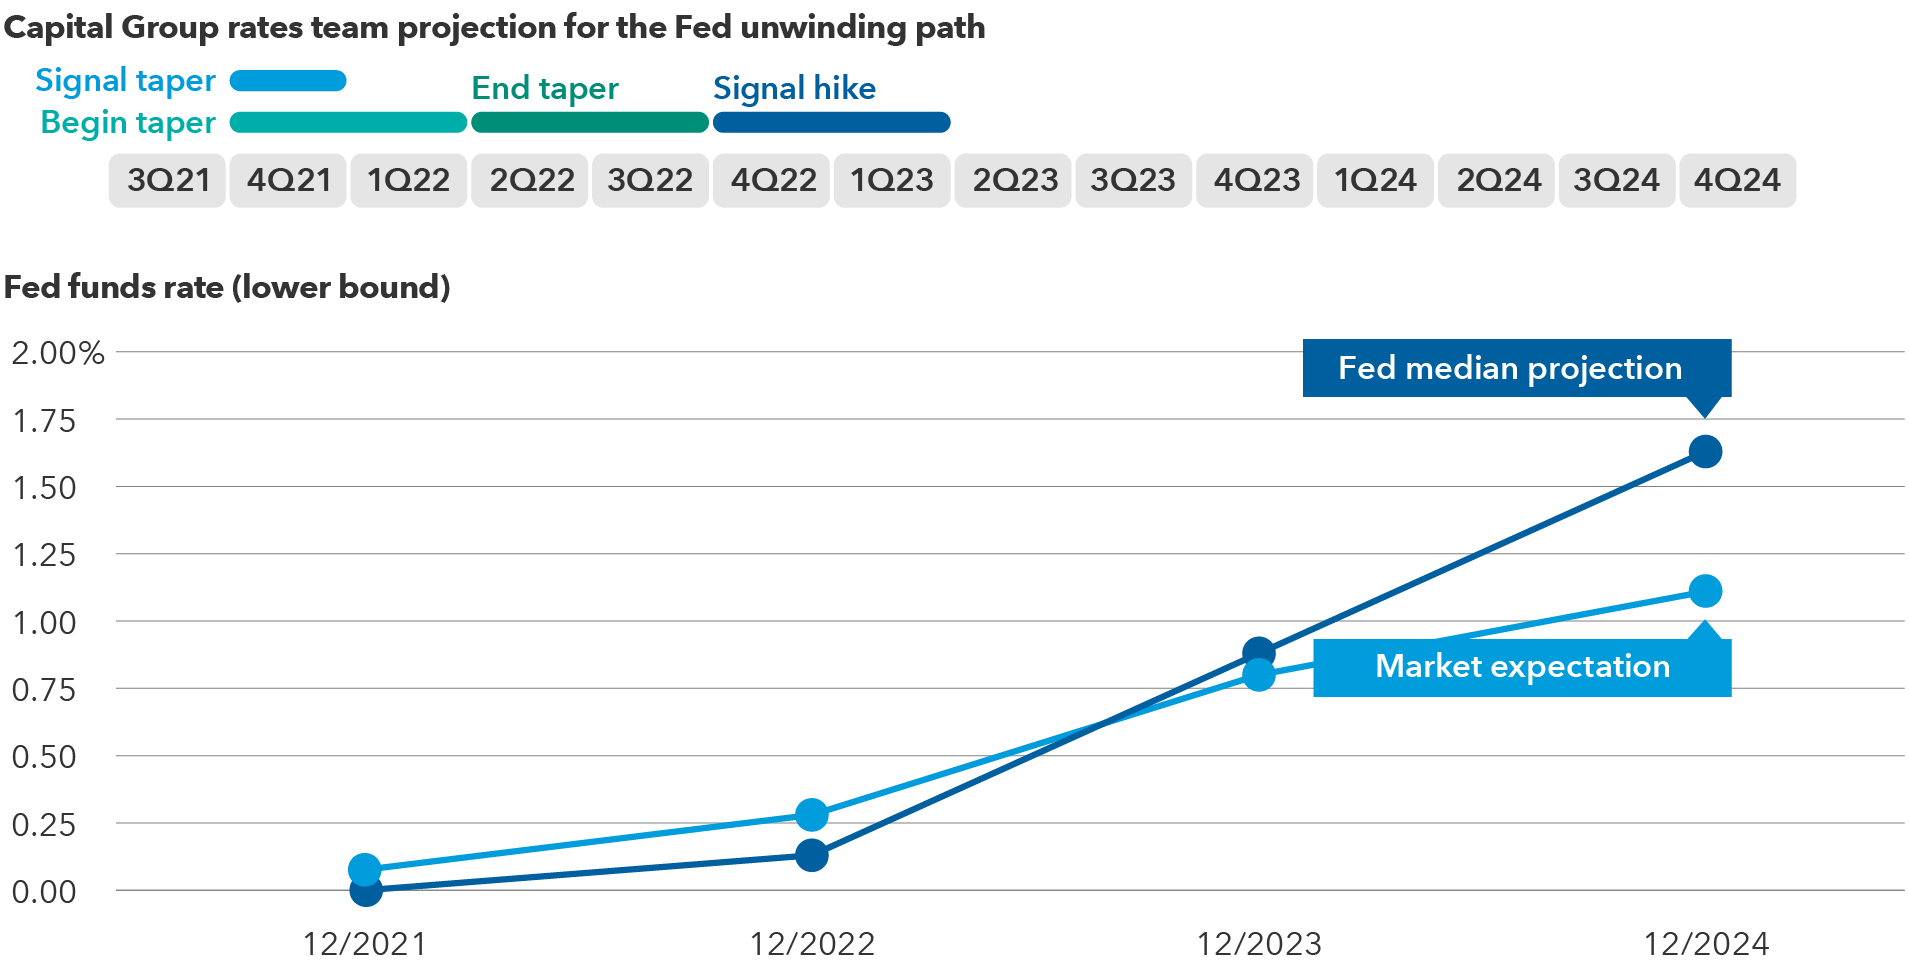 The exhibit shows a timeline from 2021 through 2024. At the topmost part of the chart are Capital Group’s rates team estimates for when the Fed is likely to signal a rate hike. It may begin in the fourth quarter of 2021 with the announcement of an intention to taper asset purchases, with an actual program to begin as early as that quarter or the first quarter of 2022. That program would probably end as soon as the second quarter of 2022 or as late as the third quarter of 2022. It would then signal an initial rate hike as early as the fourth quarter of 2022 or as late as the first quarter of 2023. Below this is the Fed’s dot plot of committee member median expectations and market expectations based on future pricing for the federal funds rate range lower bound. It shows the Fed projections for the end of 2021, 2022, 2023 and 2024 of 0.0%, 0.1%, 0.9% 1.6%, respectively. For market projections, it shows just above 0.0%, 0.3%, 0.8% and 1.1%, respectively.